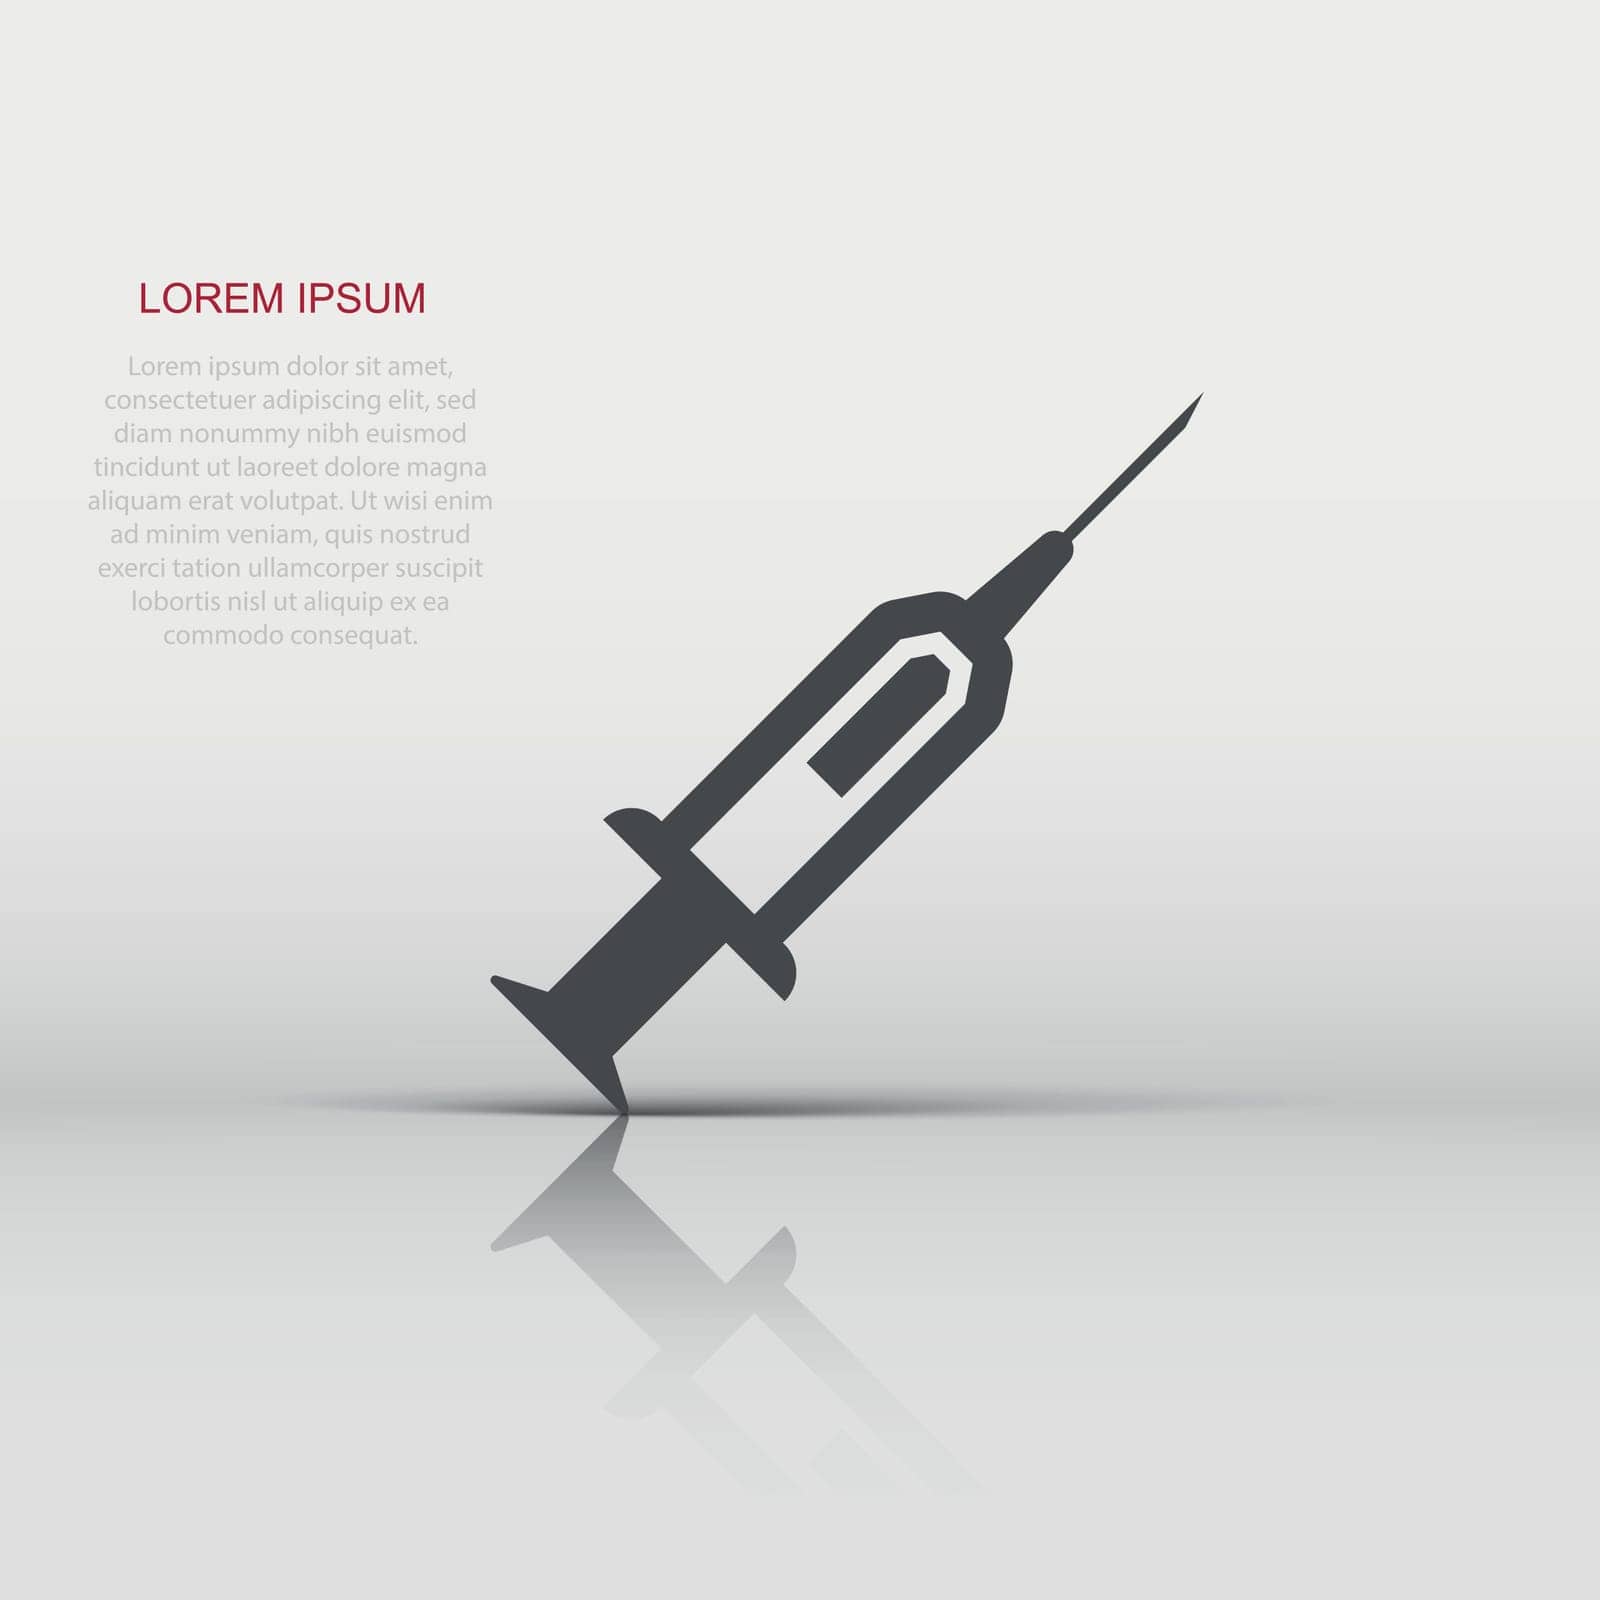 Syringe icon in flat style. Inject needle vector illustration on white isolated background. Drug dose business concept. by LysenkoA